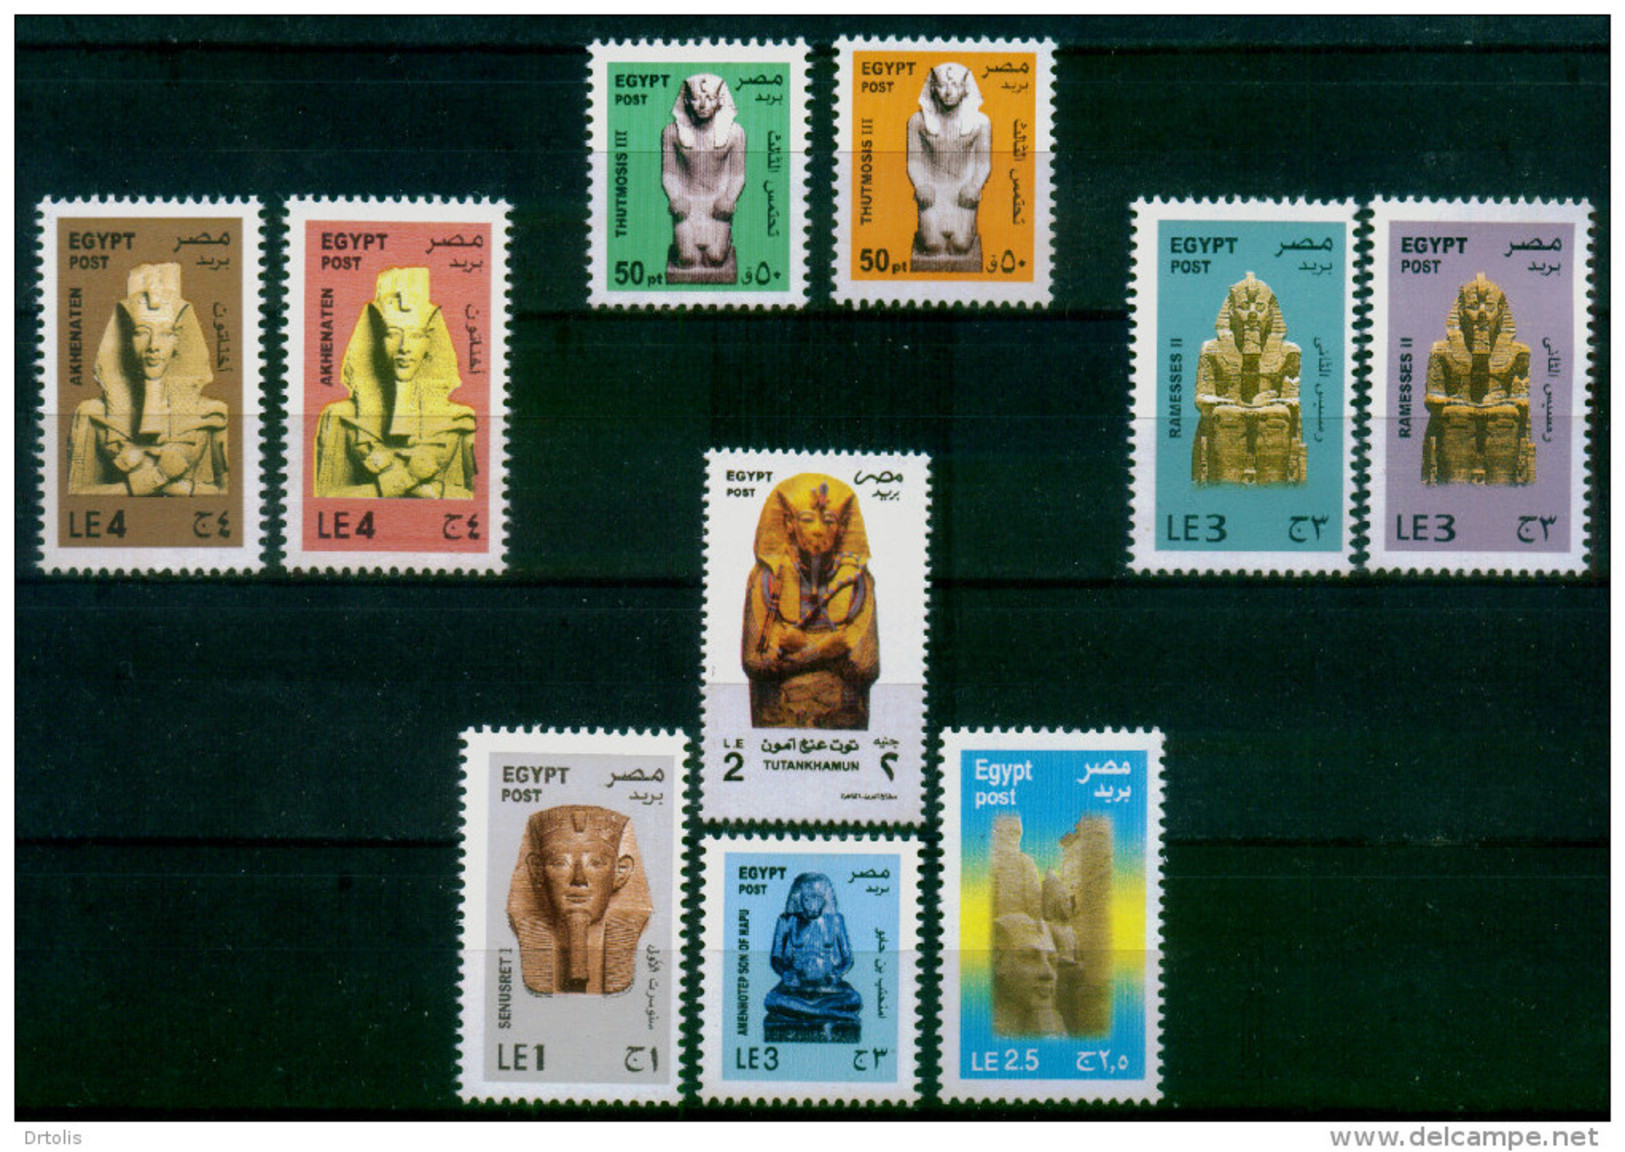 EGYPT / 2010-2015 / THE CURRENT REGULAR SET TO DATE + OFFICIAL BULLETINS / ARCHEOLOGY / EGYPT ANTIQUITY / MNH / VF - Nuevos